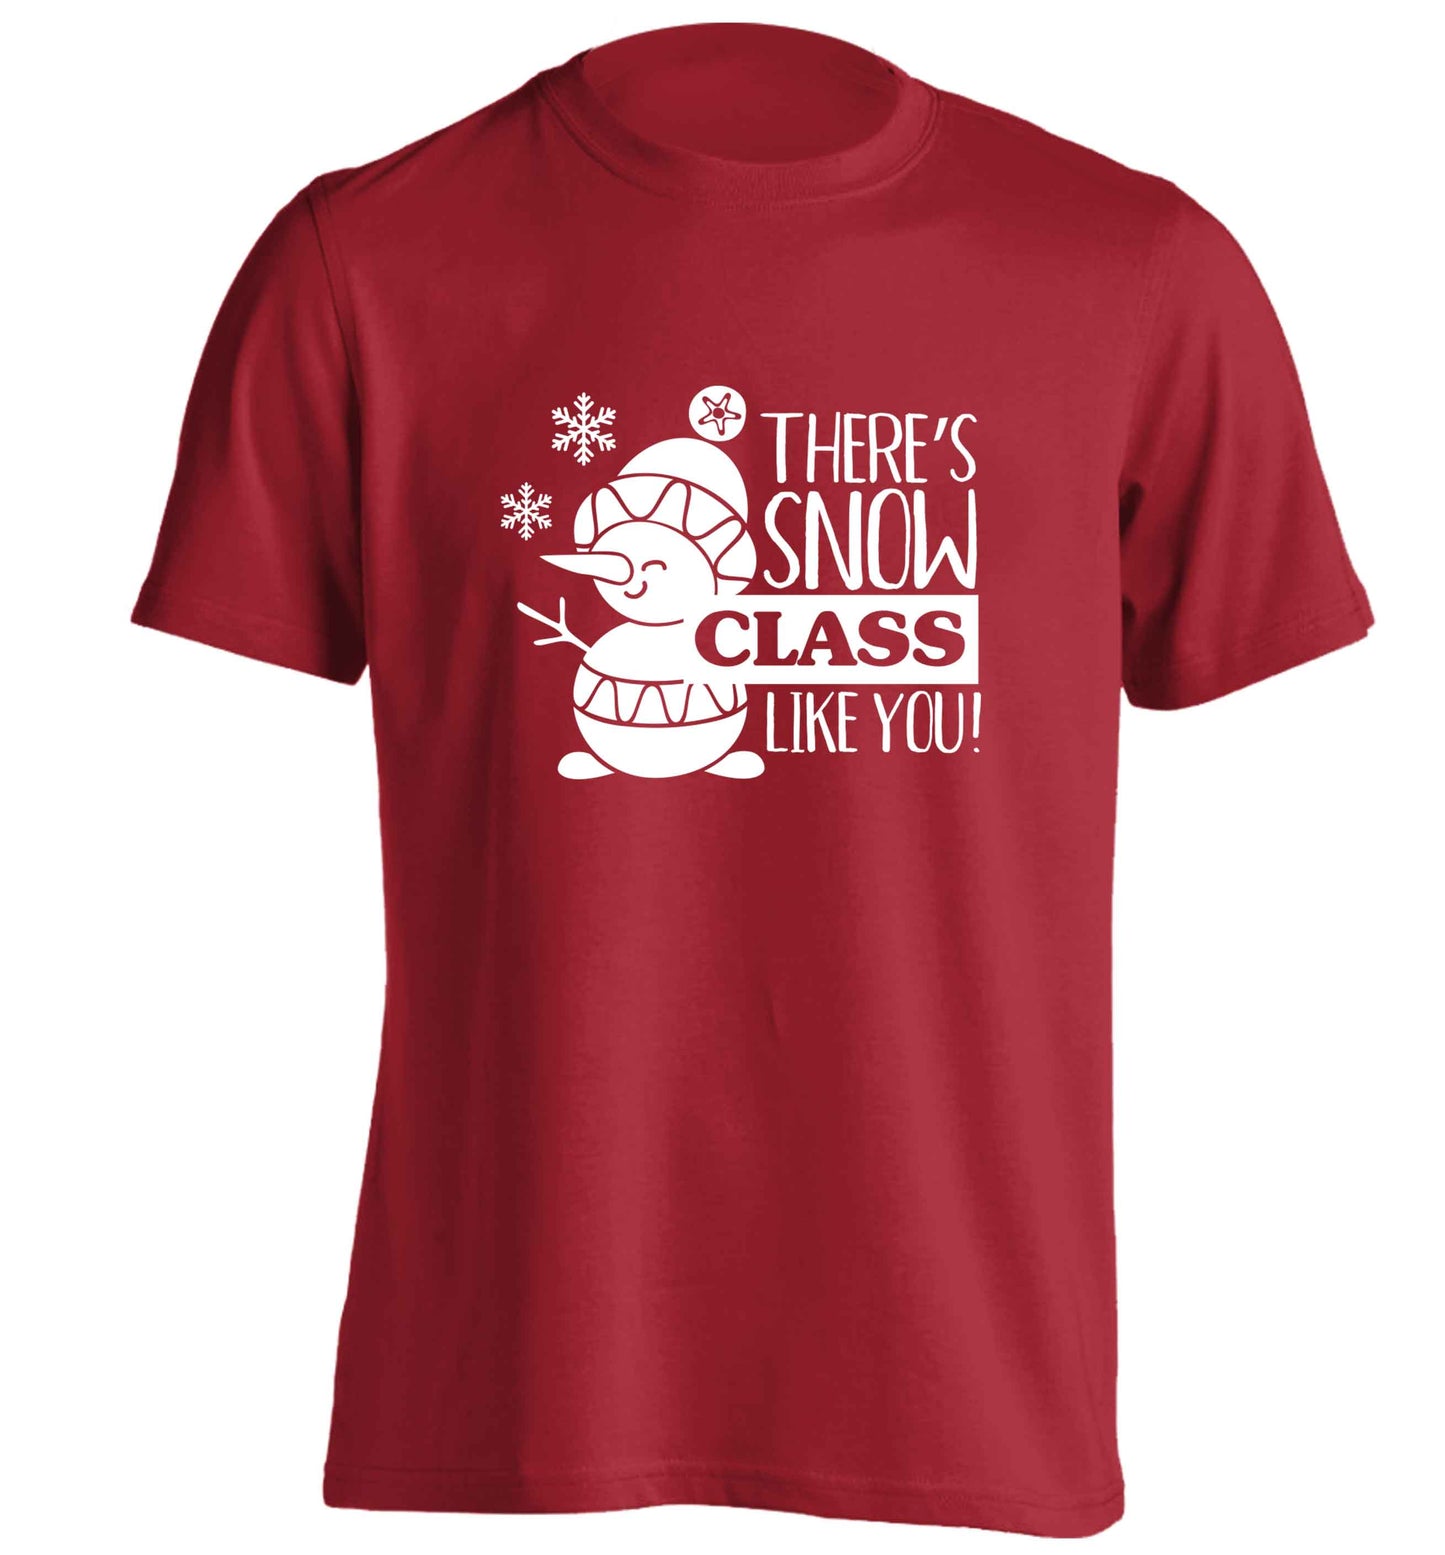 There's snow class like you adults unisex red Tshirt 2XL